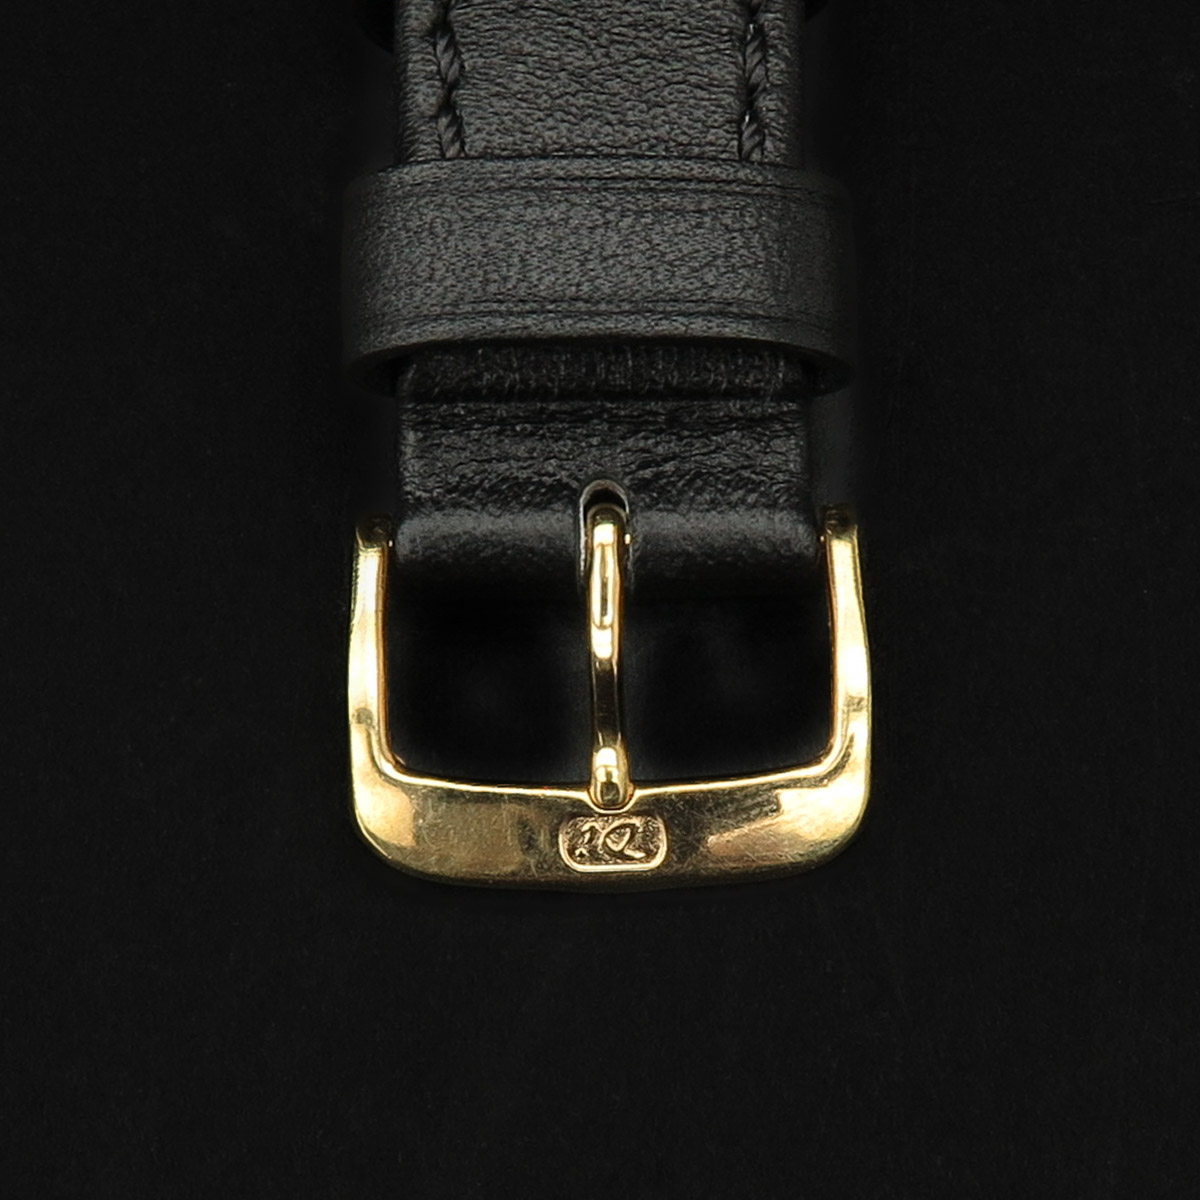 A Mens Watch - Image 6 of 6